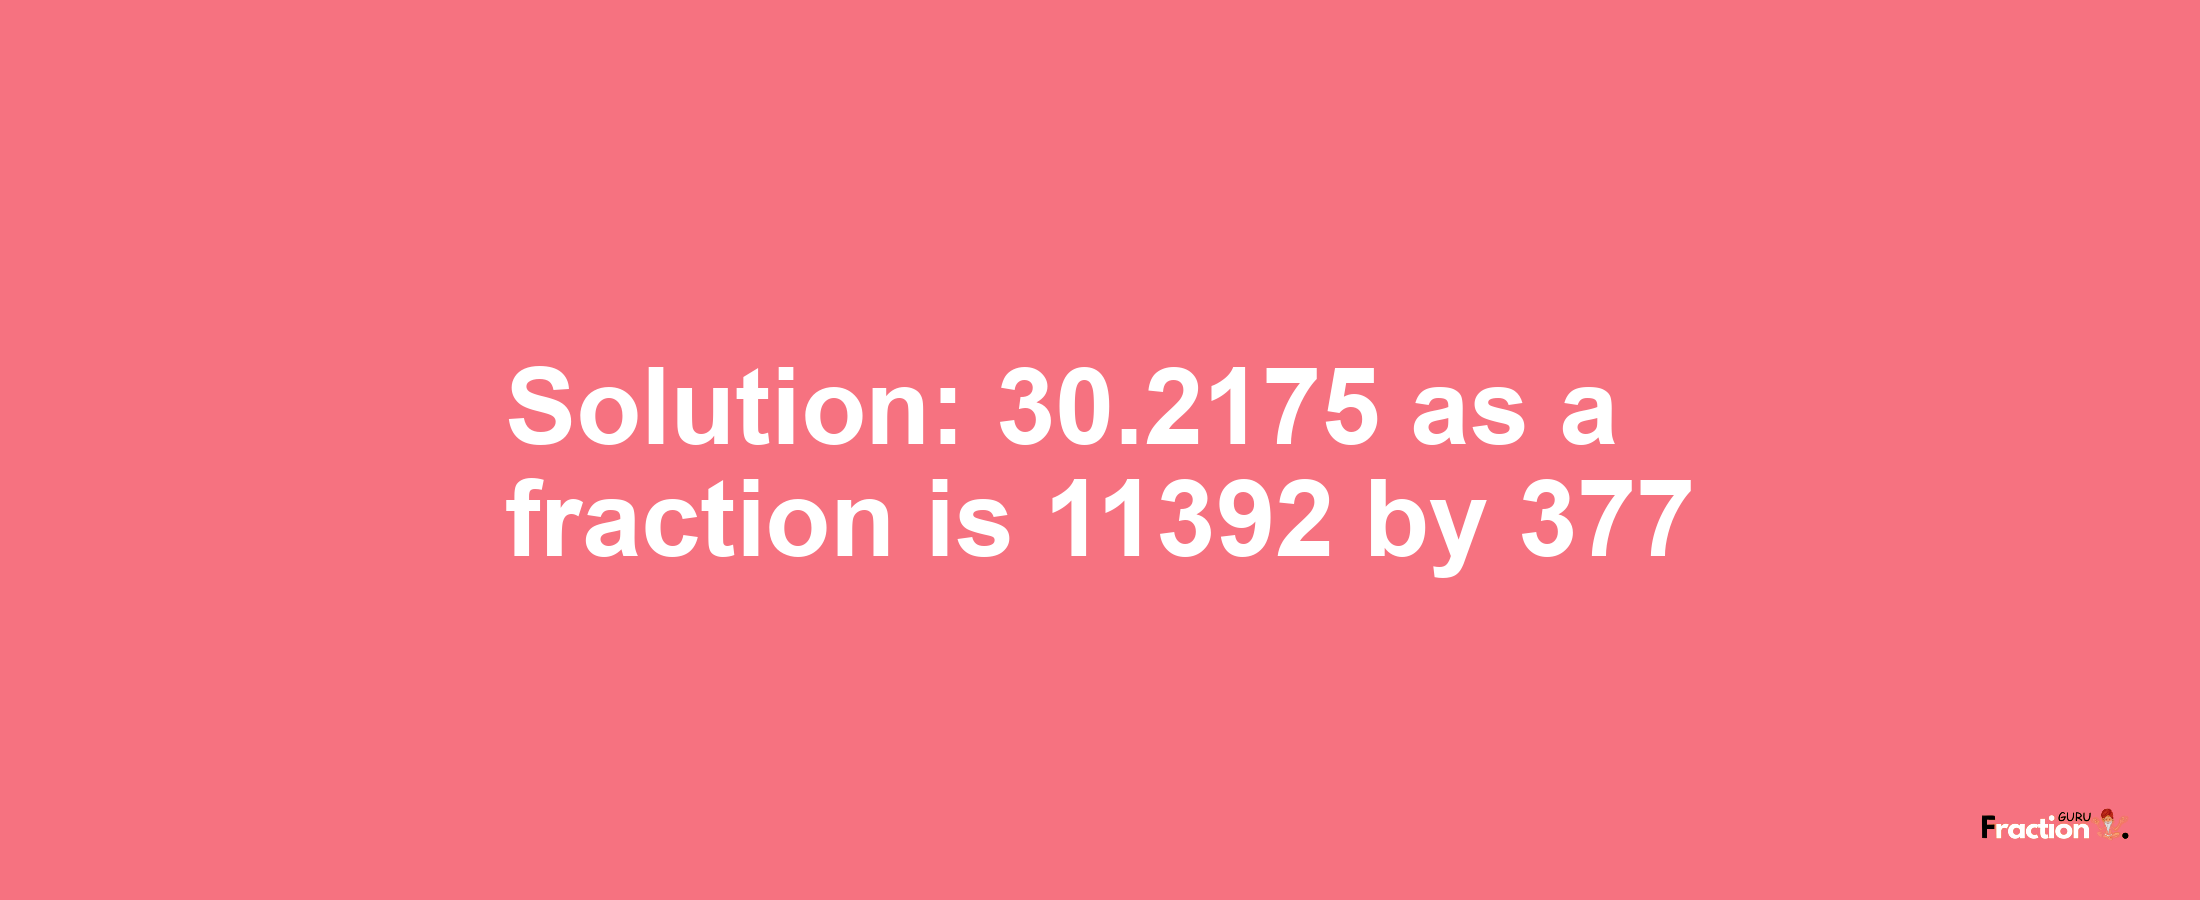 Solution:30.2175 as a fraction is 11392/377